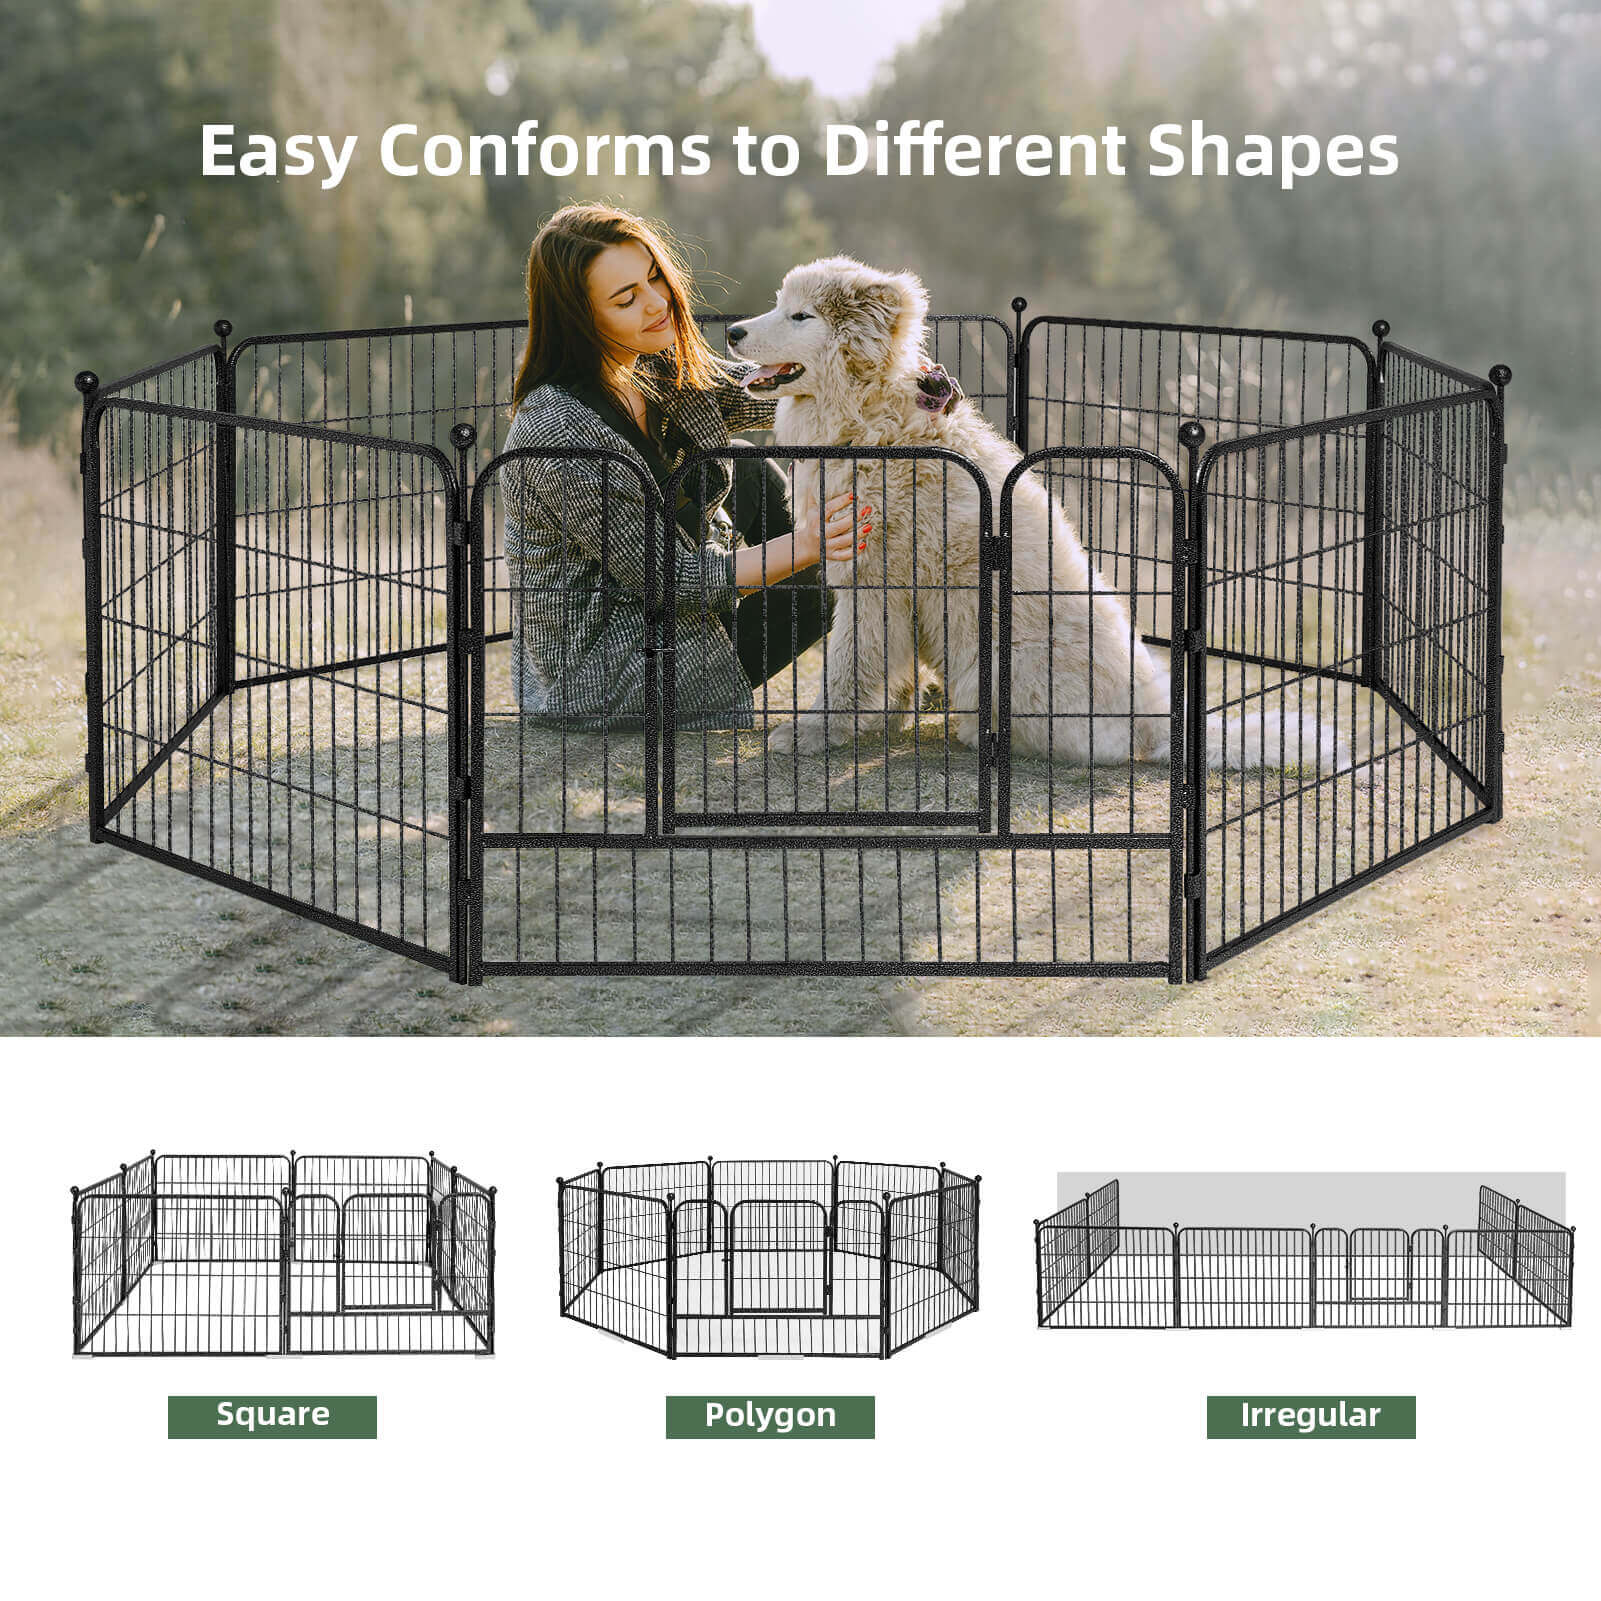 Elecwish High-Security Pet Fences can easy conforms to different shapes